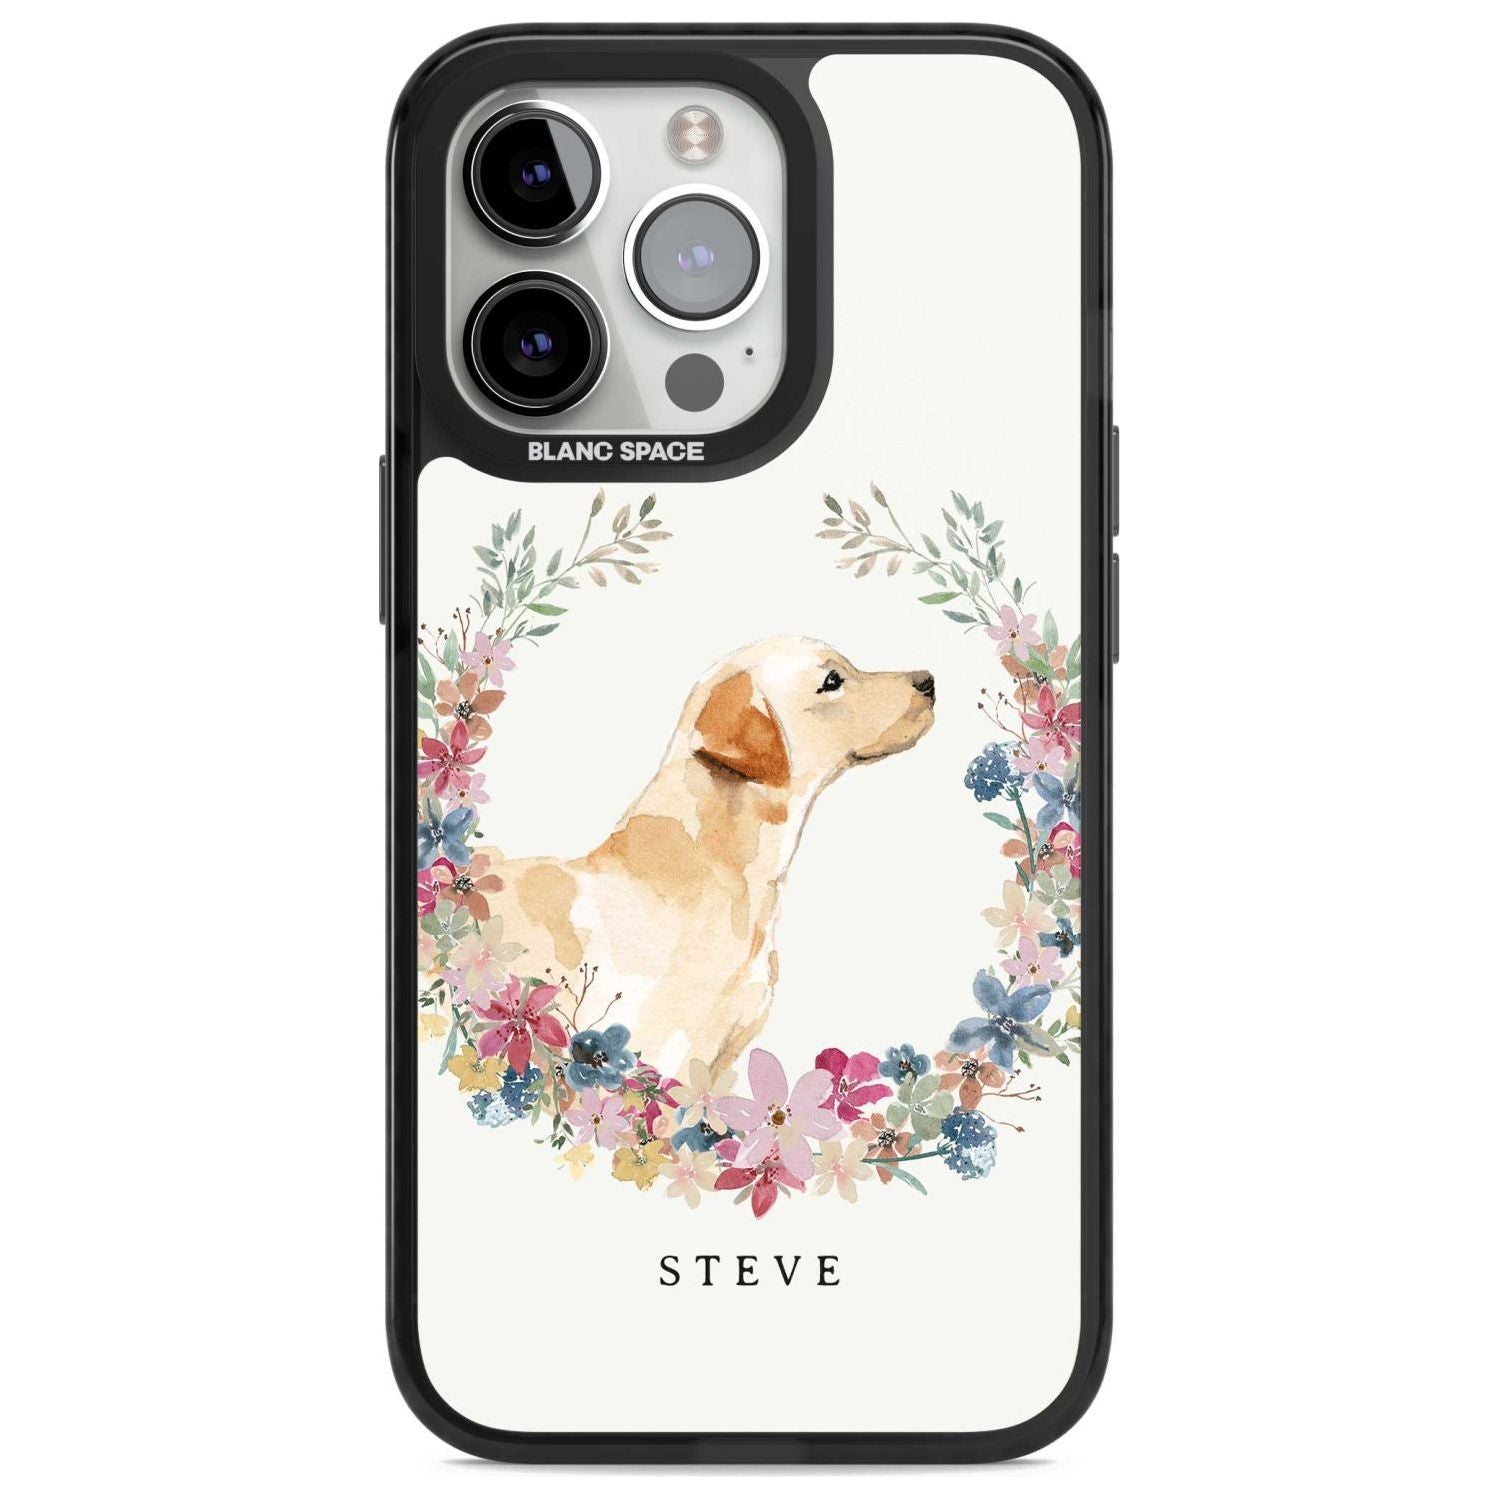 Personalised Yellow Labrador - Watercolour Dog Portrait Custom Phone Case iPhone 15 Pro Max / Magsafe Black Impact Case,iPhone 15 Pro / Magsafe Black Impact Case,iPhone 14 Pro Max / Magsafe Black Impact Case,iPhone 14 Pro / Magsafe Black Impact Case,iPhone 13 Pro / Magsafe Black Impact Case Blanc Space